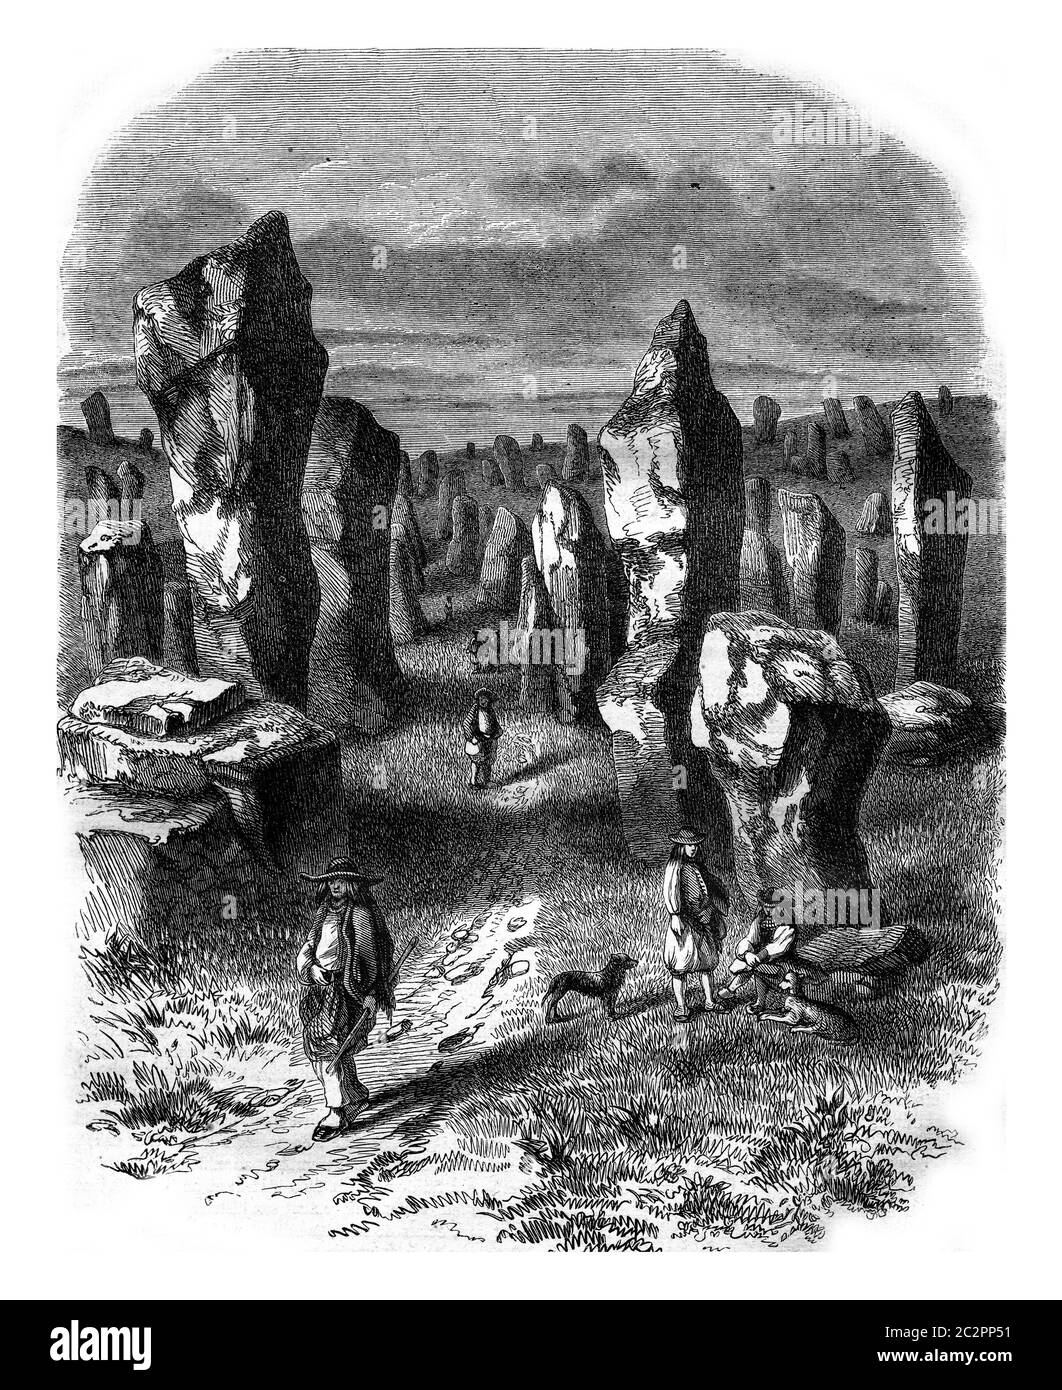 View taken in the field Carnac, Morbihan department, vintage engraved illustration. Magasin Pittoresque 1847. Stock Photo